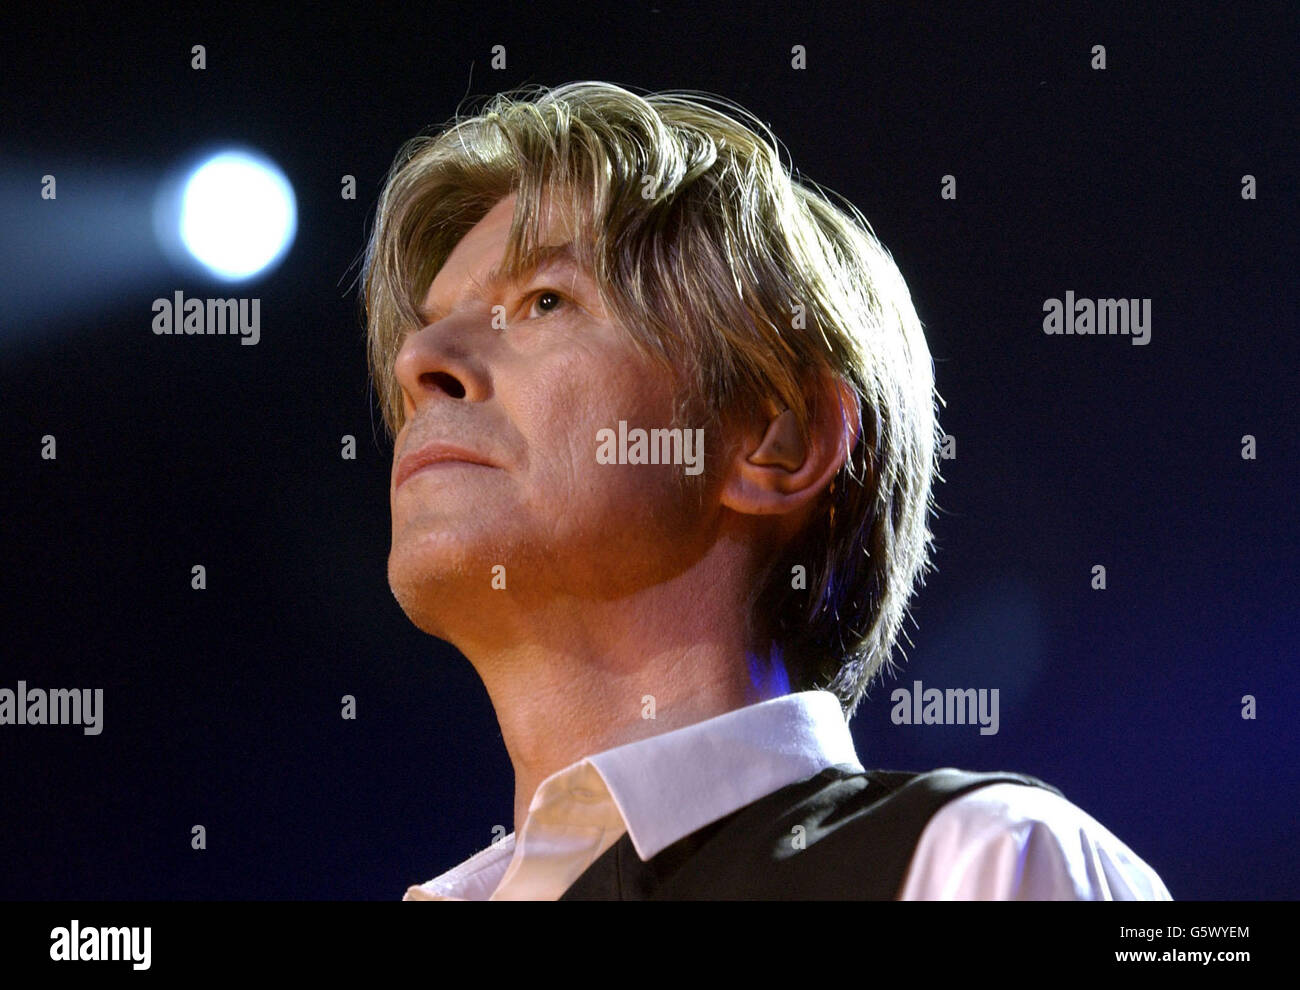 David Bowie performs material from his newly released album Heathen, during Meltdown 2002, the finale of a two-week event, at the Royal Festival Hall in London. Stock Photo